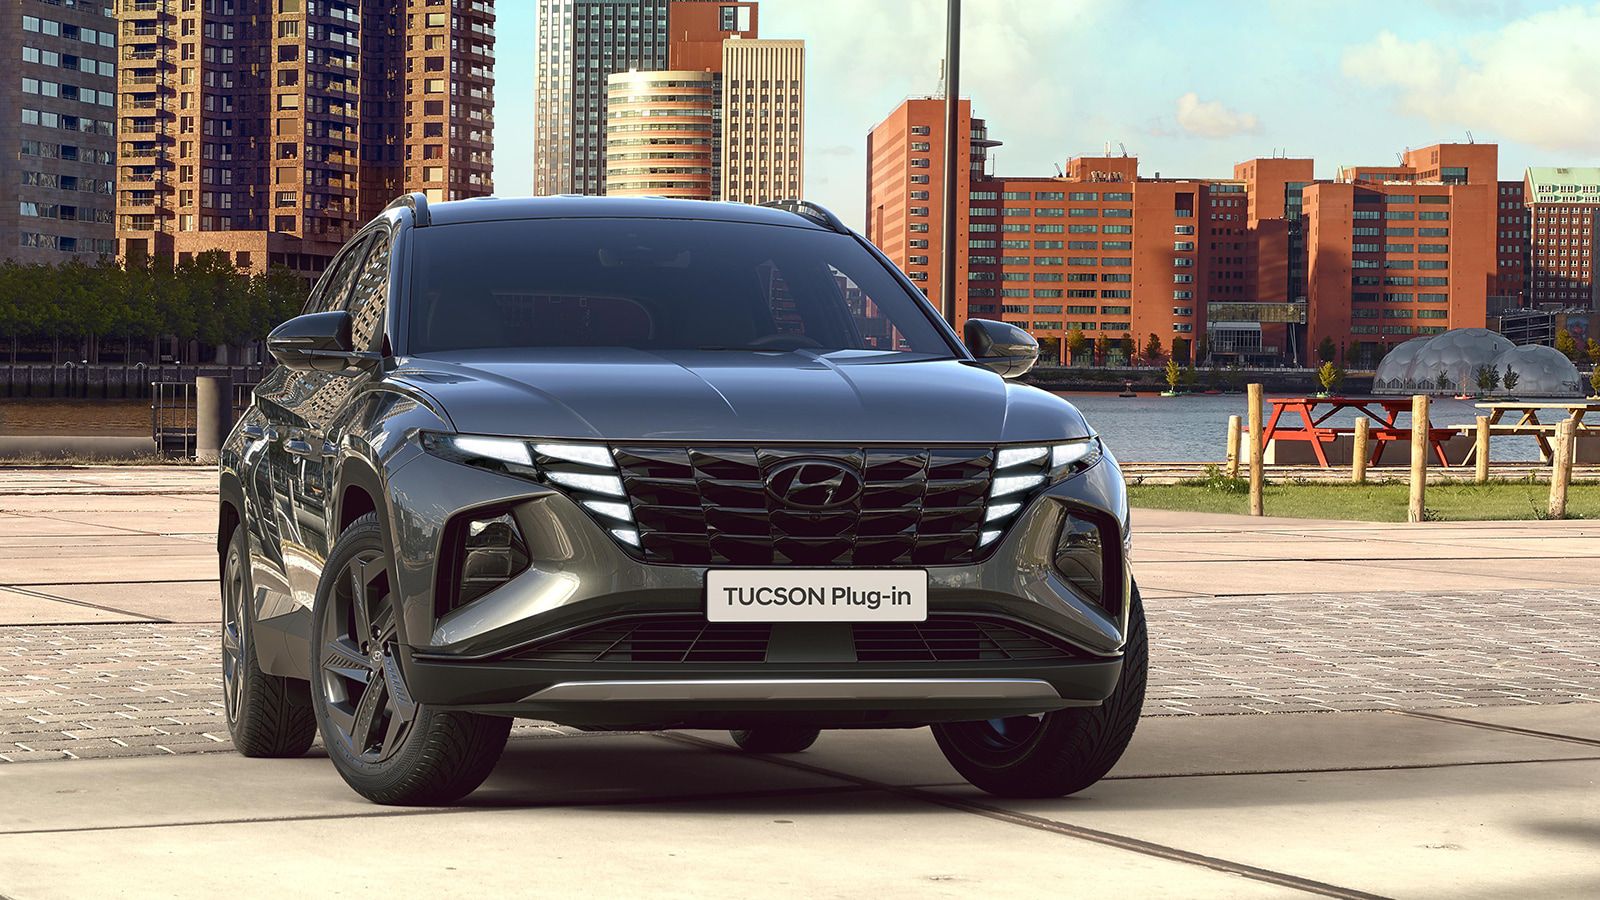 Hyundai TUCSON Plug-in Hybrid in Amazon Gray Metallic pictured from the front